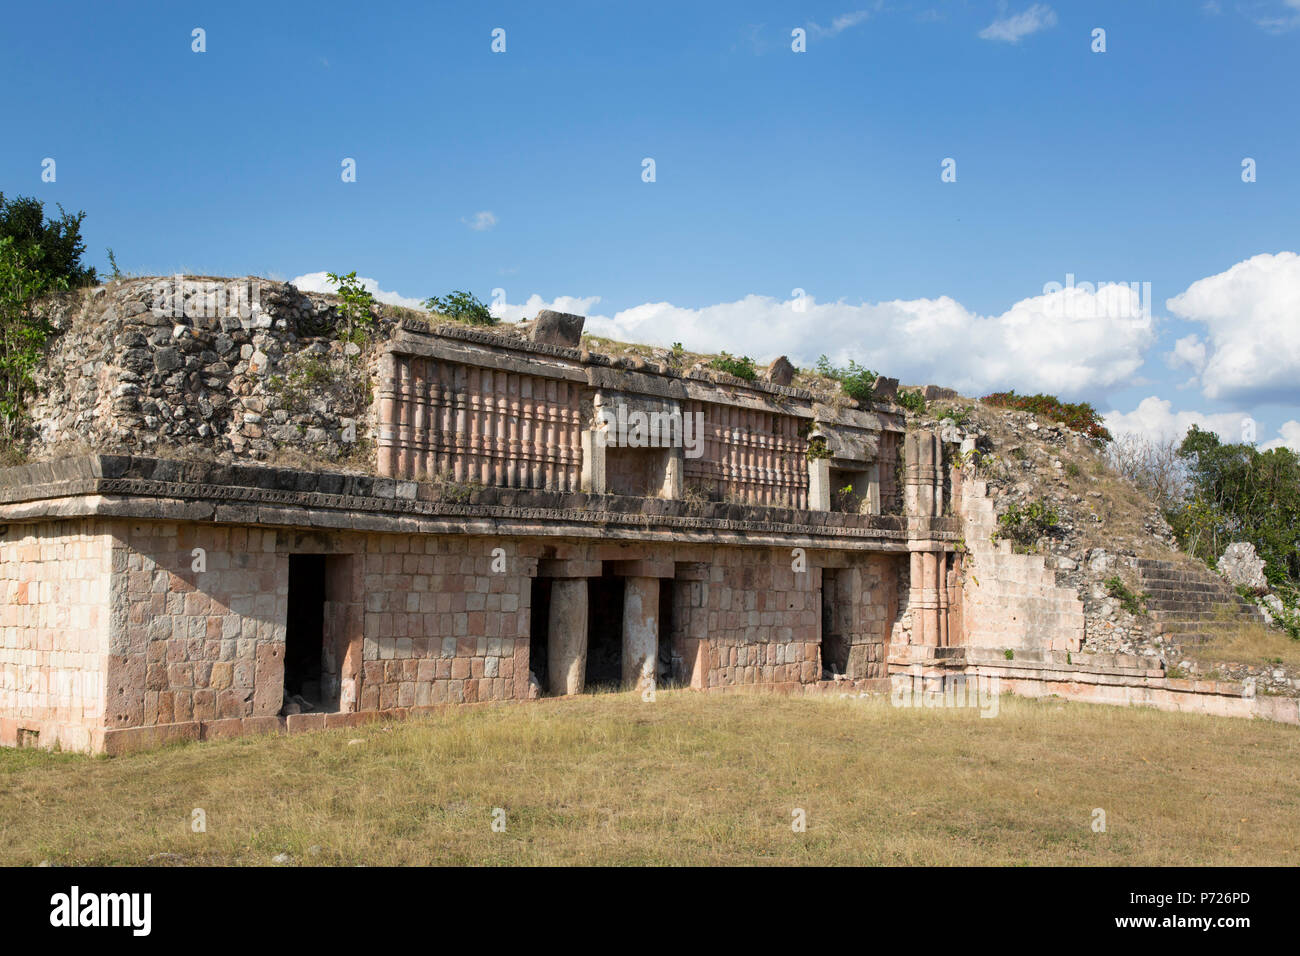 Mayan Ruins, The Palace, Puuc Style, Chacmultun Archaeological Zone, Chacmultan, Yucatan, Mexico, North America Stock Photo